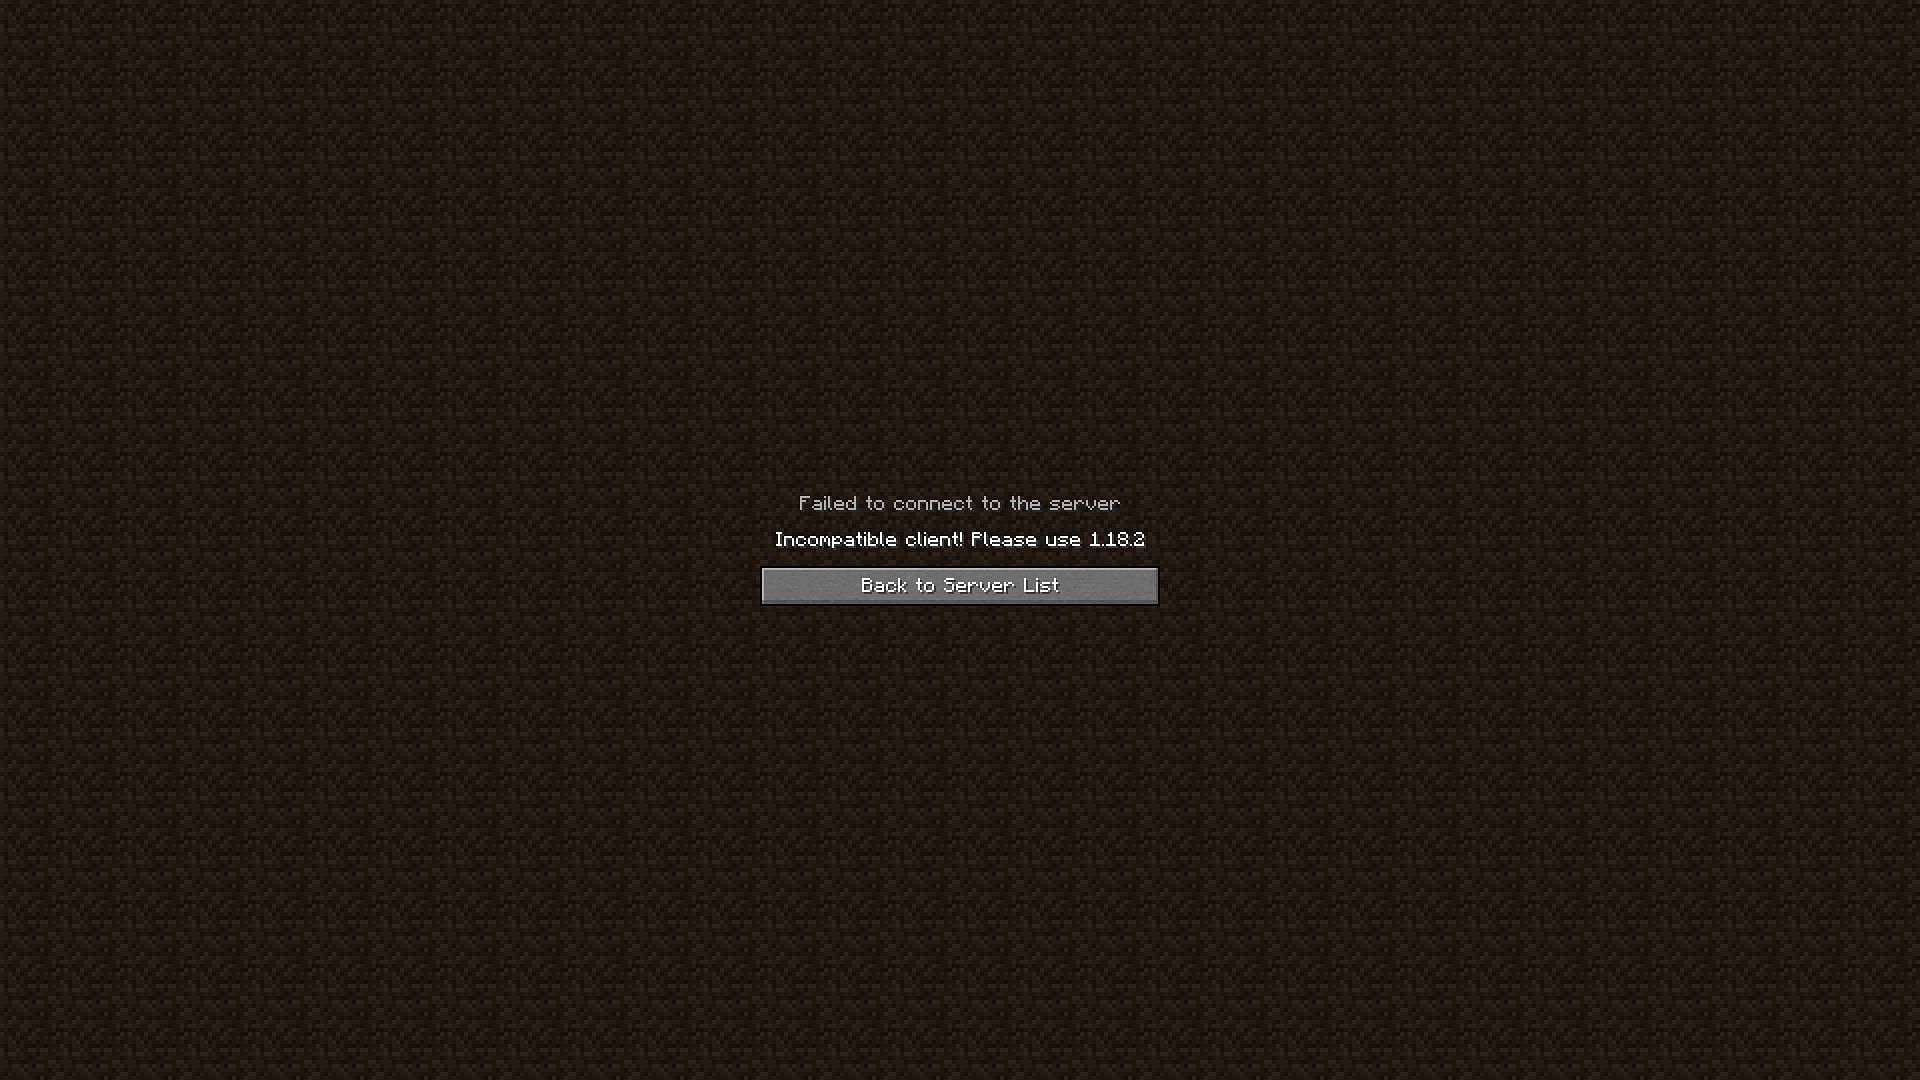 An example of a connection failed screen (Image via Minecraft)